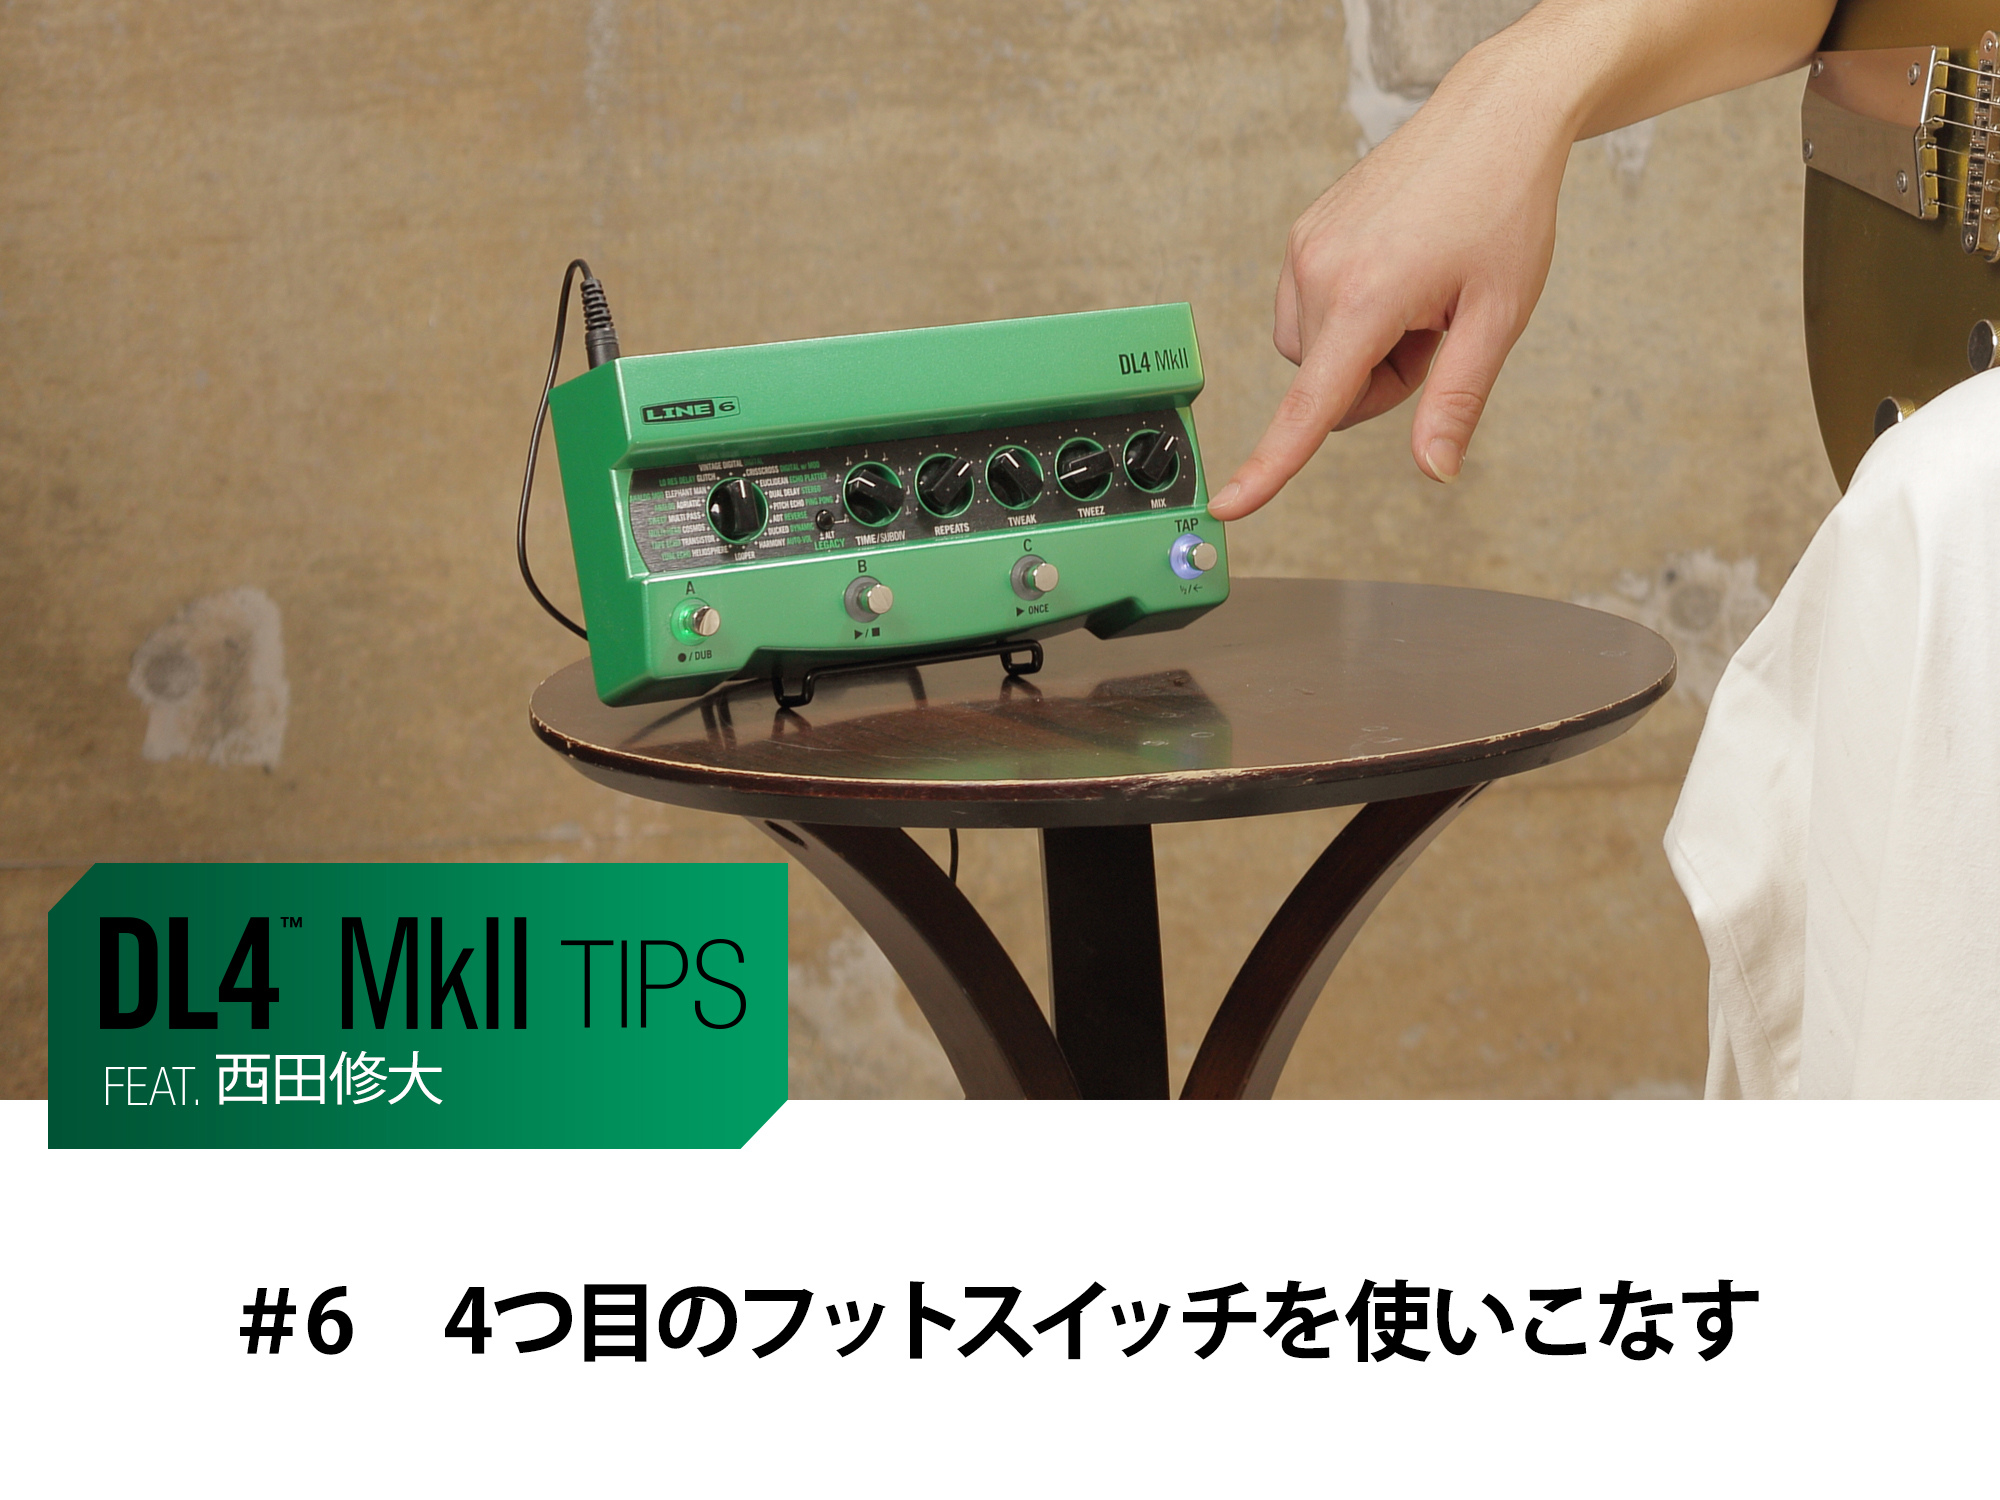 DL4 MkII Tips　第6回　feat.西田修大